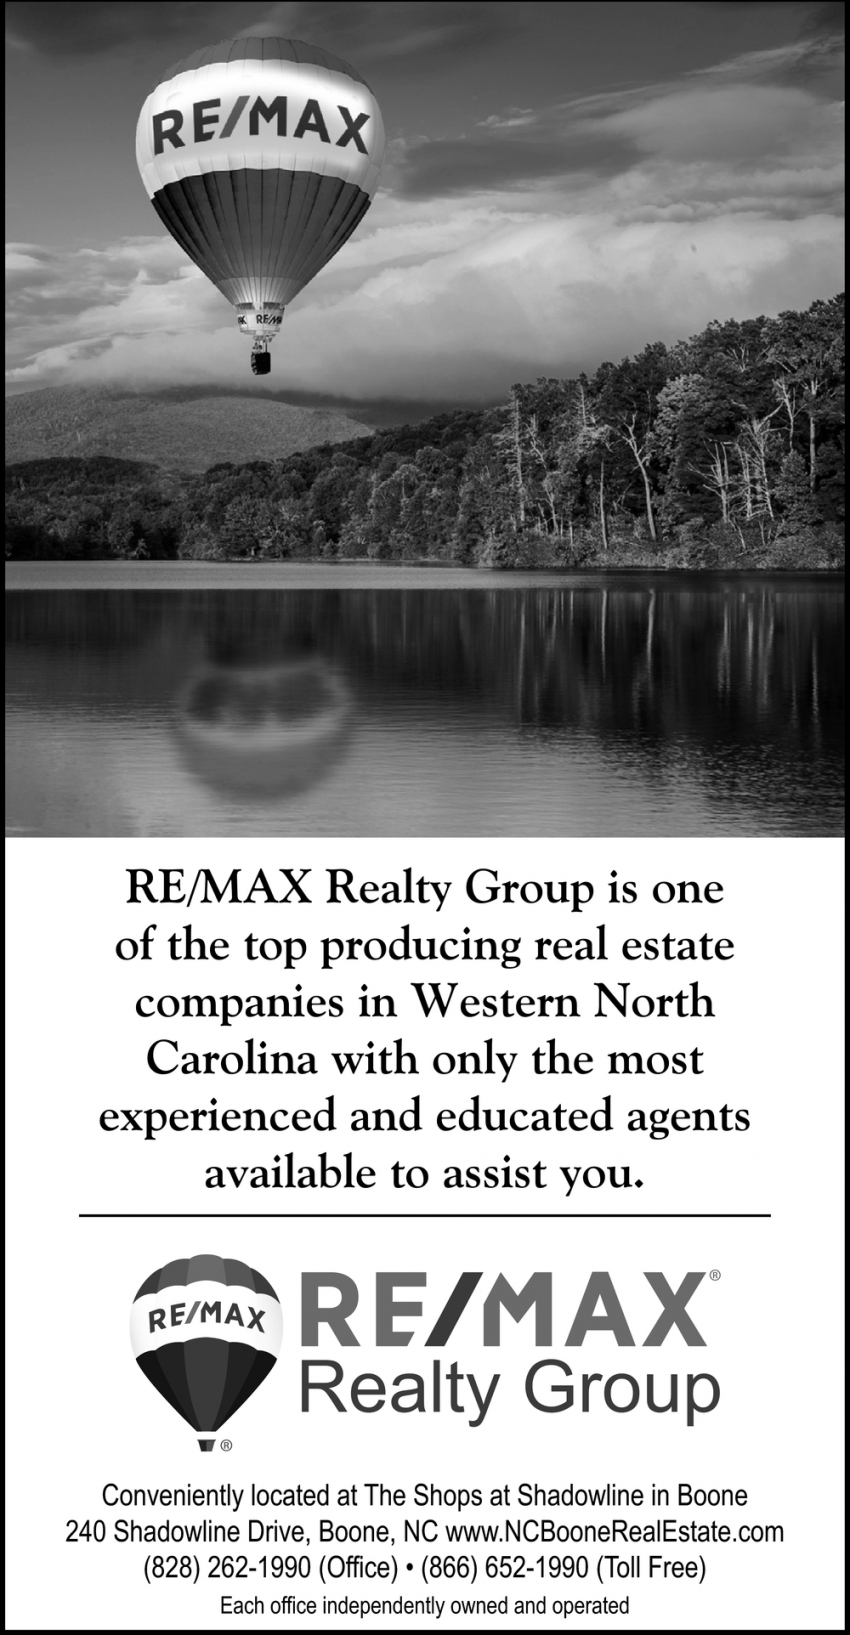 One of the Top Producing Real Estate Companies in Western North Carolina